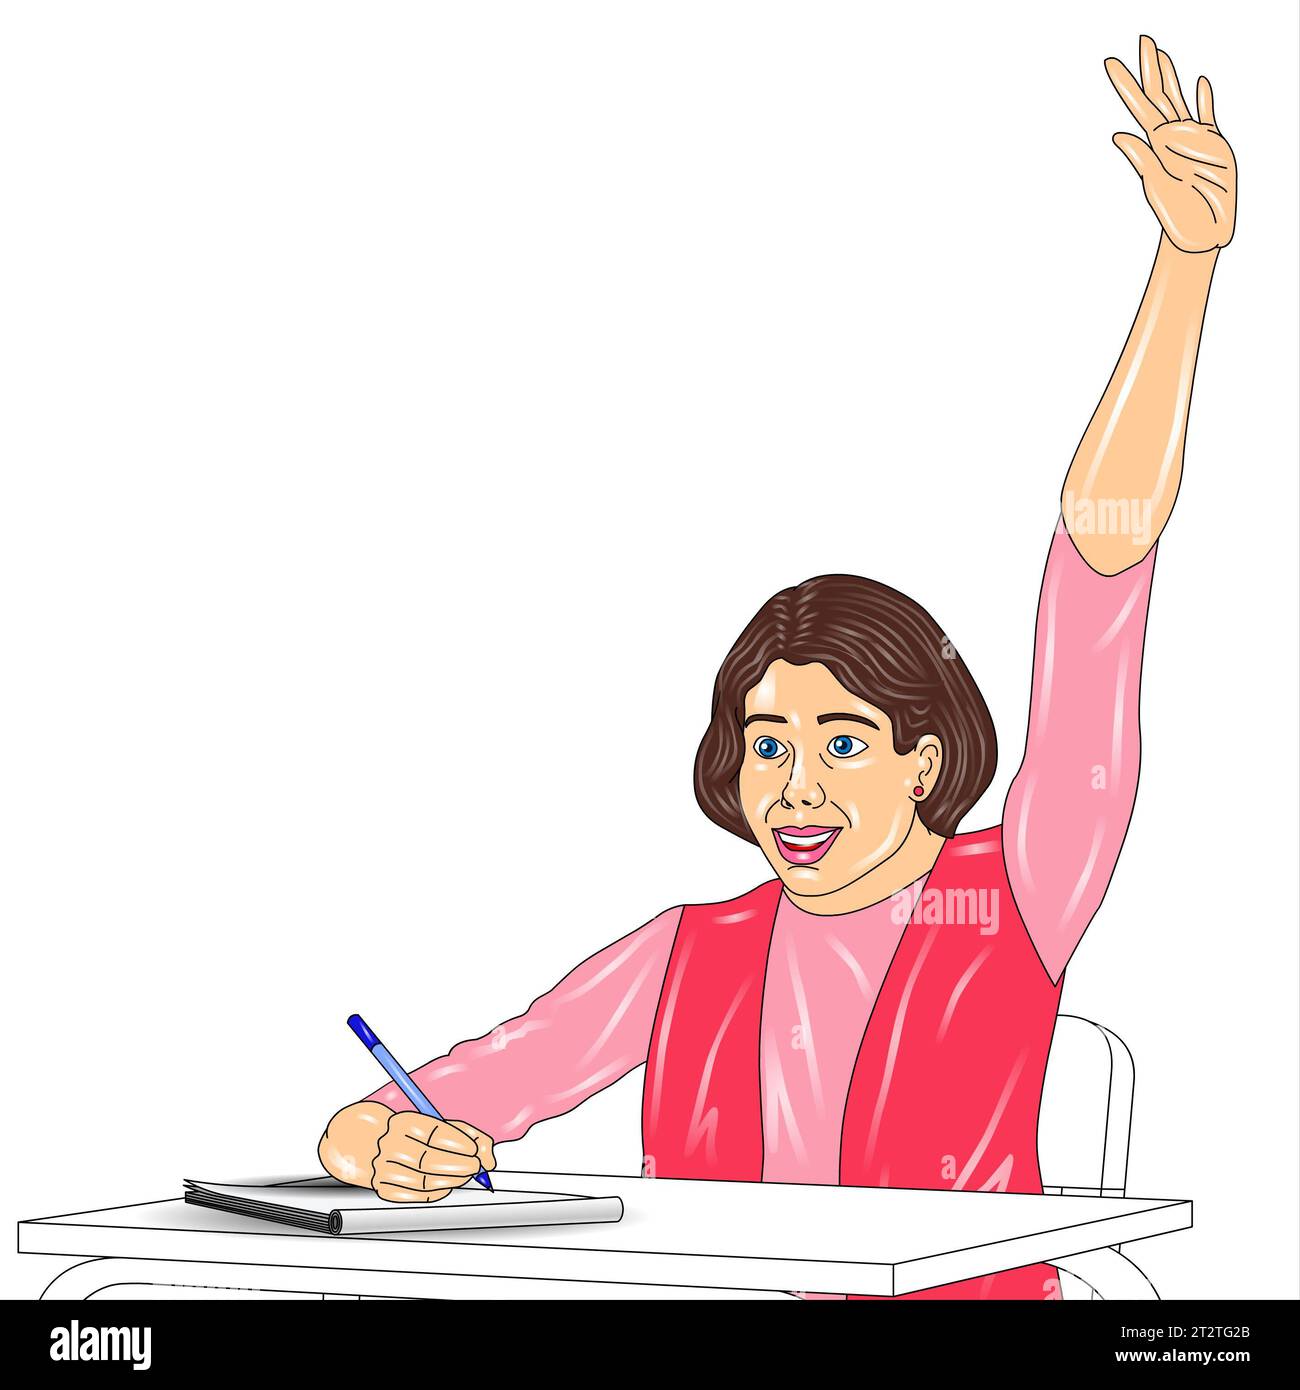 Illustration of a young woman sitting at the desk and making notes Stock Photo